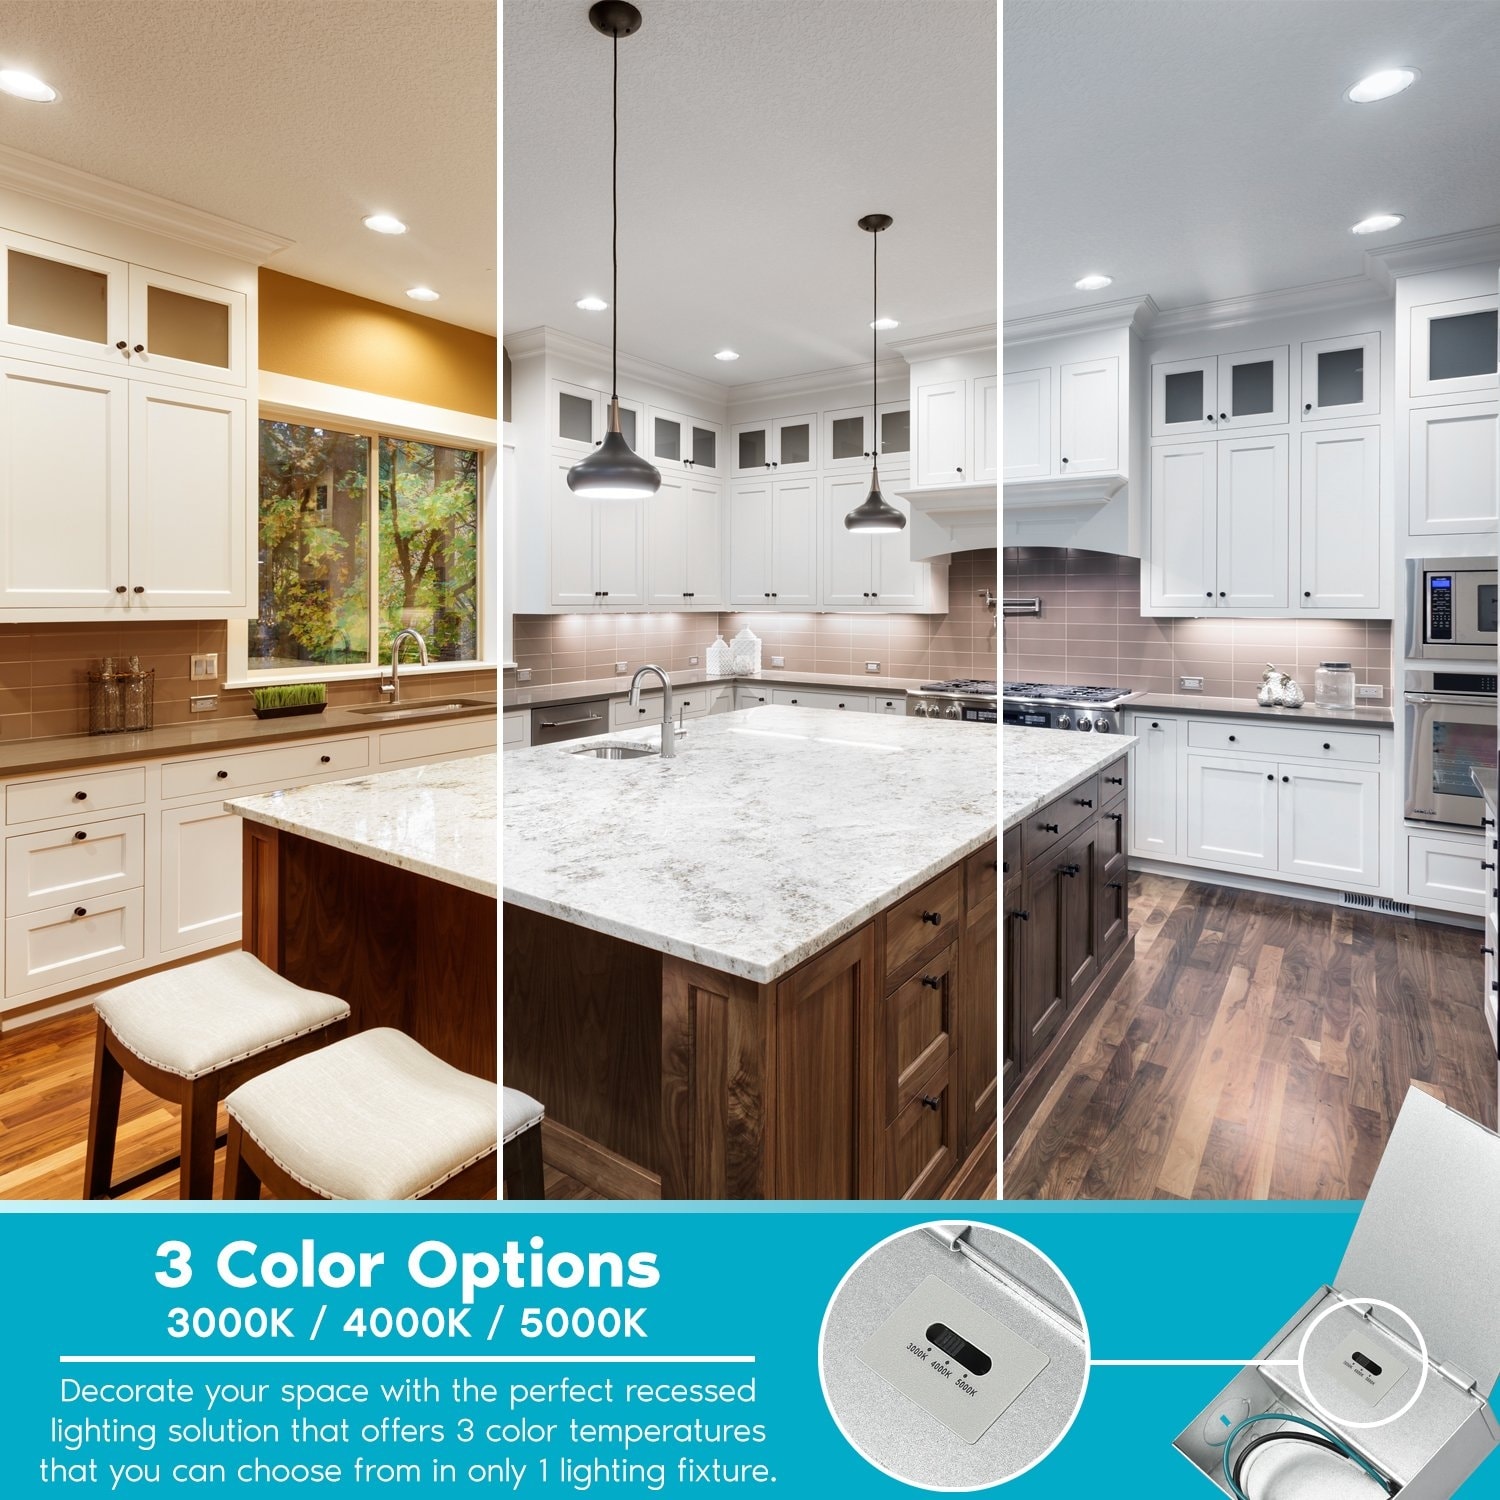 Kitchen Lighting Color Temperature – Things In The Kitchen